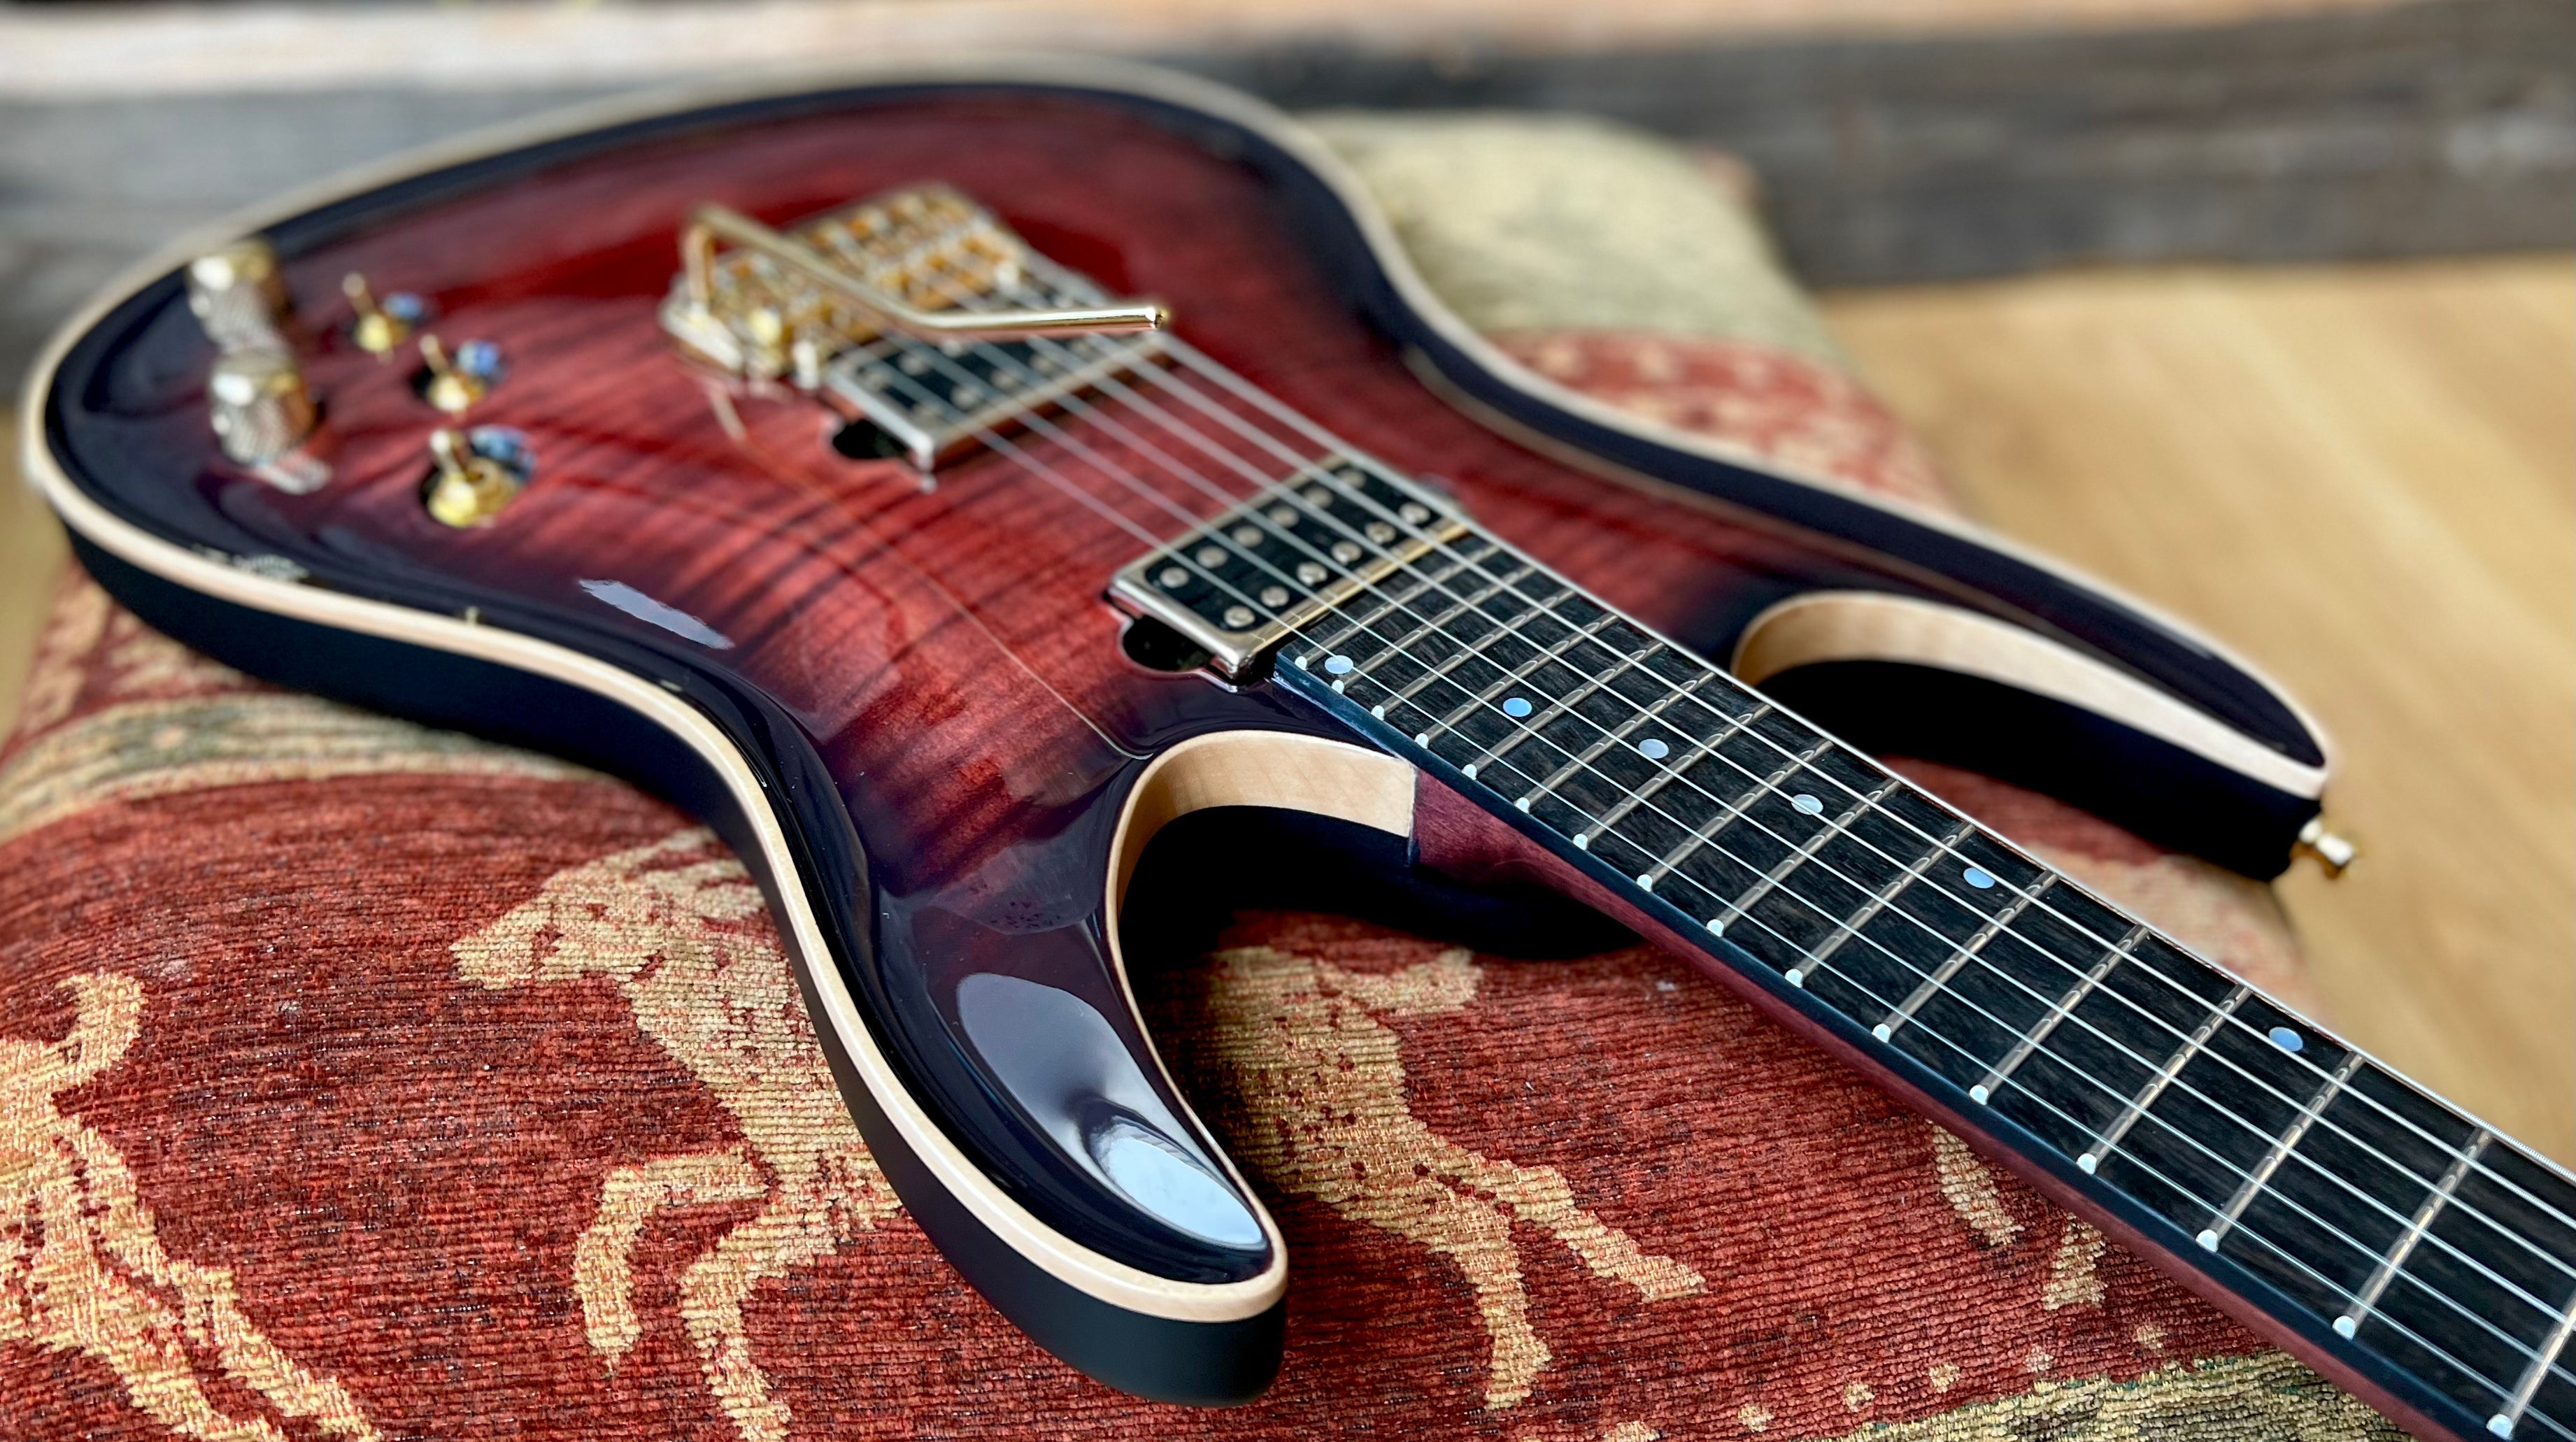 Valenti Nebula Carved, Electric Guitar for sale at Richards Guitars.